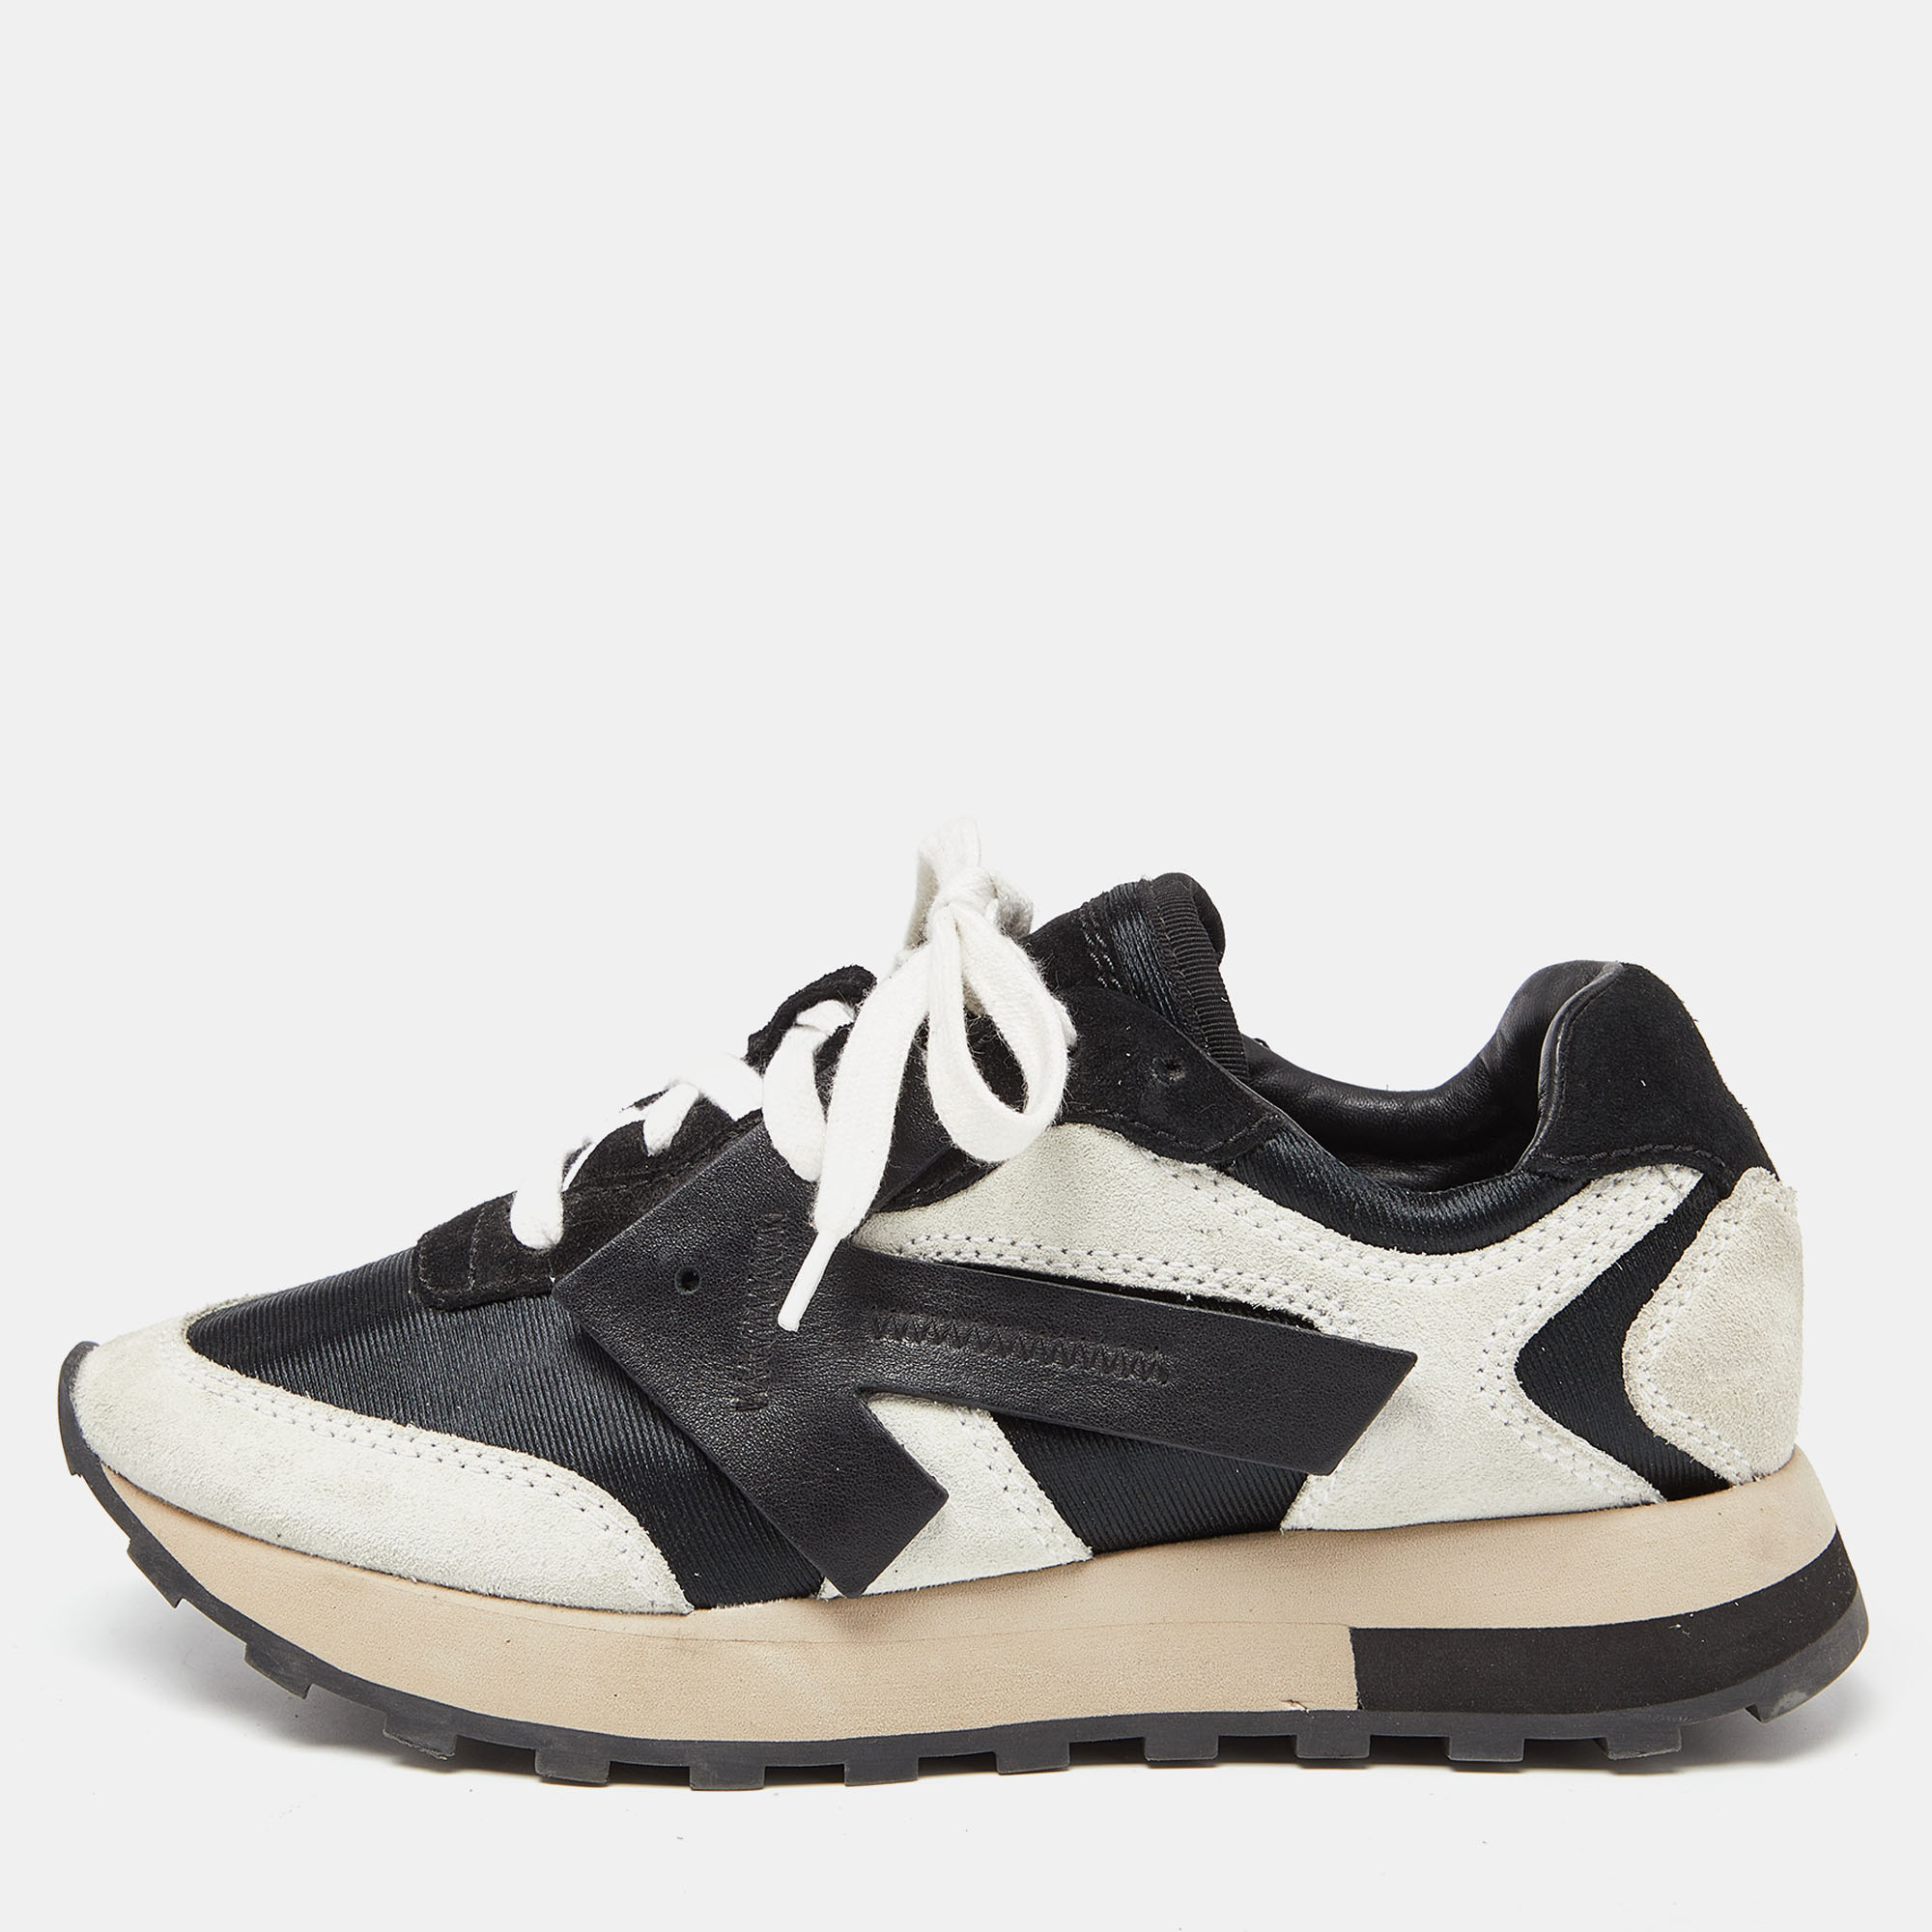 Off-white black/grey suede and fabric arrow hg runner sneakers size 36